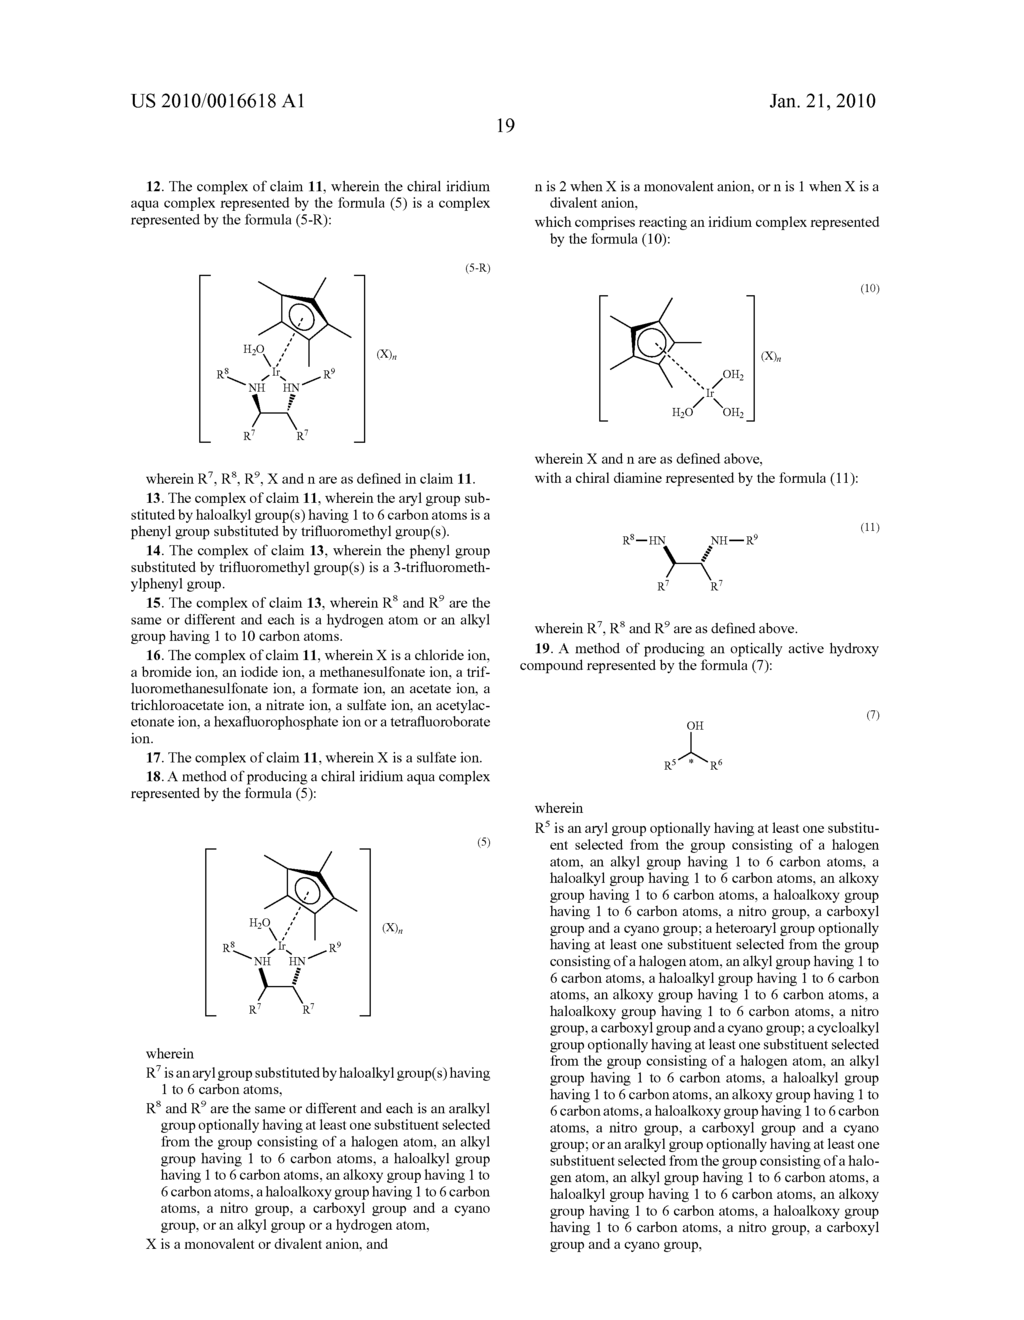 CHIRAL IRIDIUM AQUA COMPLEX AND METHOD FOR PRODUCING OPTICALLY ACTIVE HYDROXY COMPOUND BY USING THE SAME - diagram, schematic, and image 20